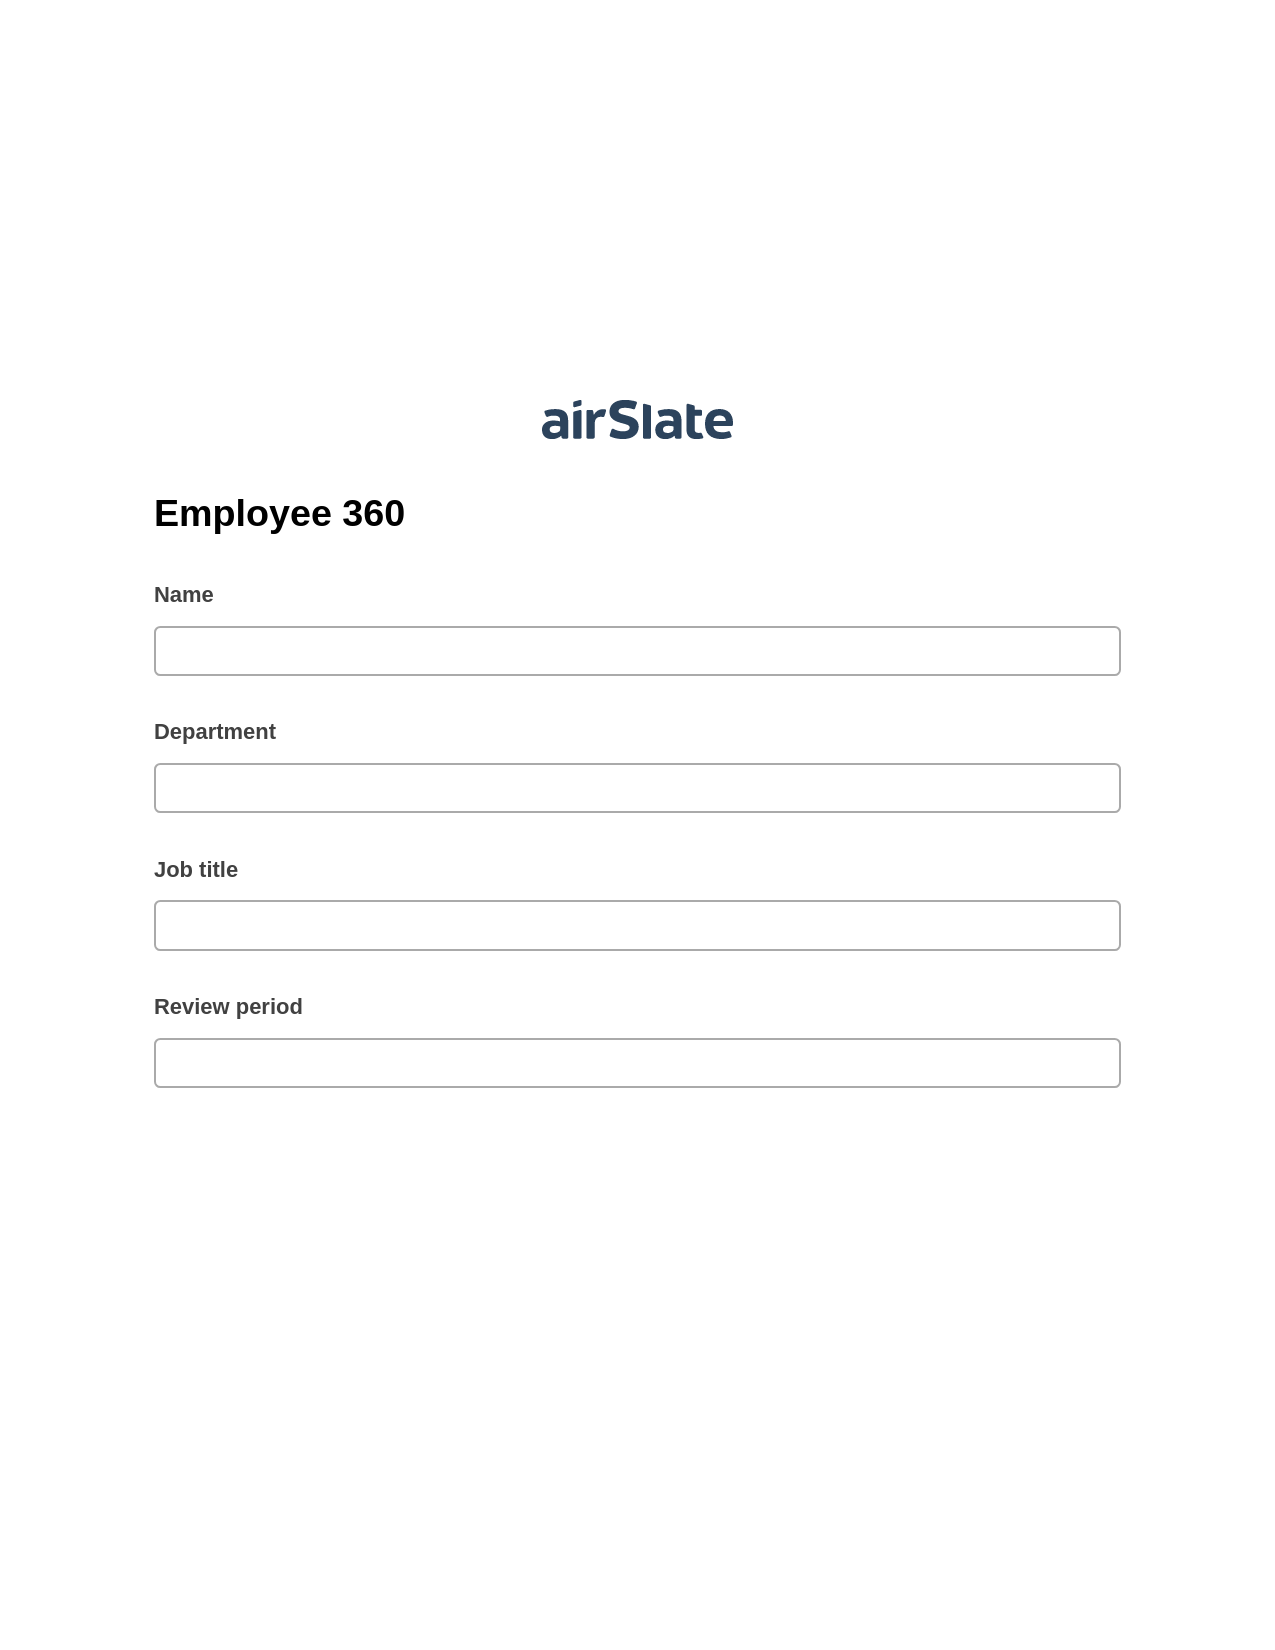 Employee 360 Pre-fill from another Slate Bot, Update MS Dynamics 365 Record Bot, Archive to OneDrive Bot